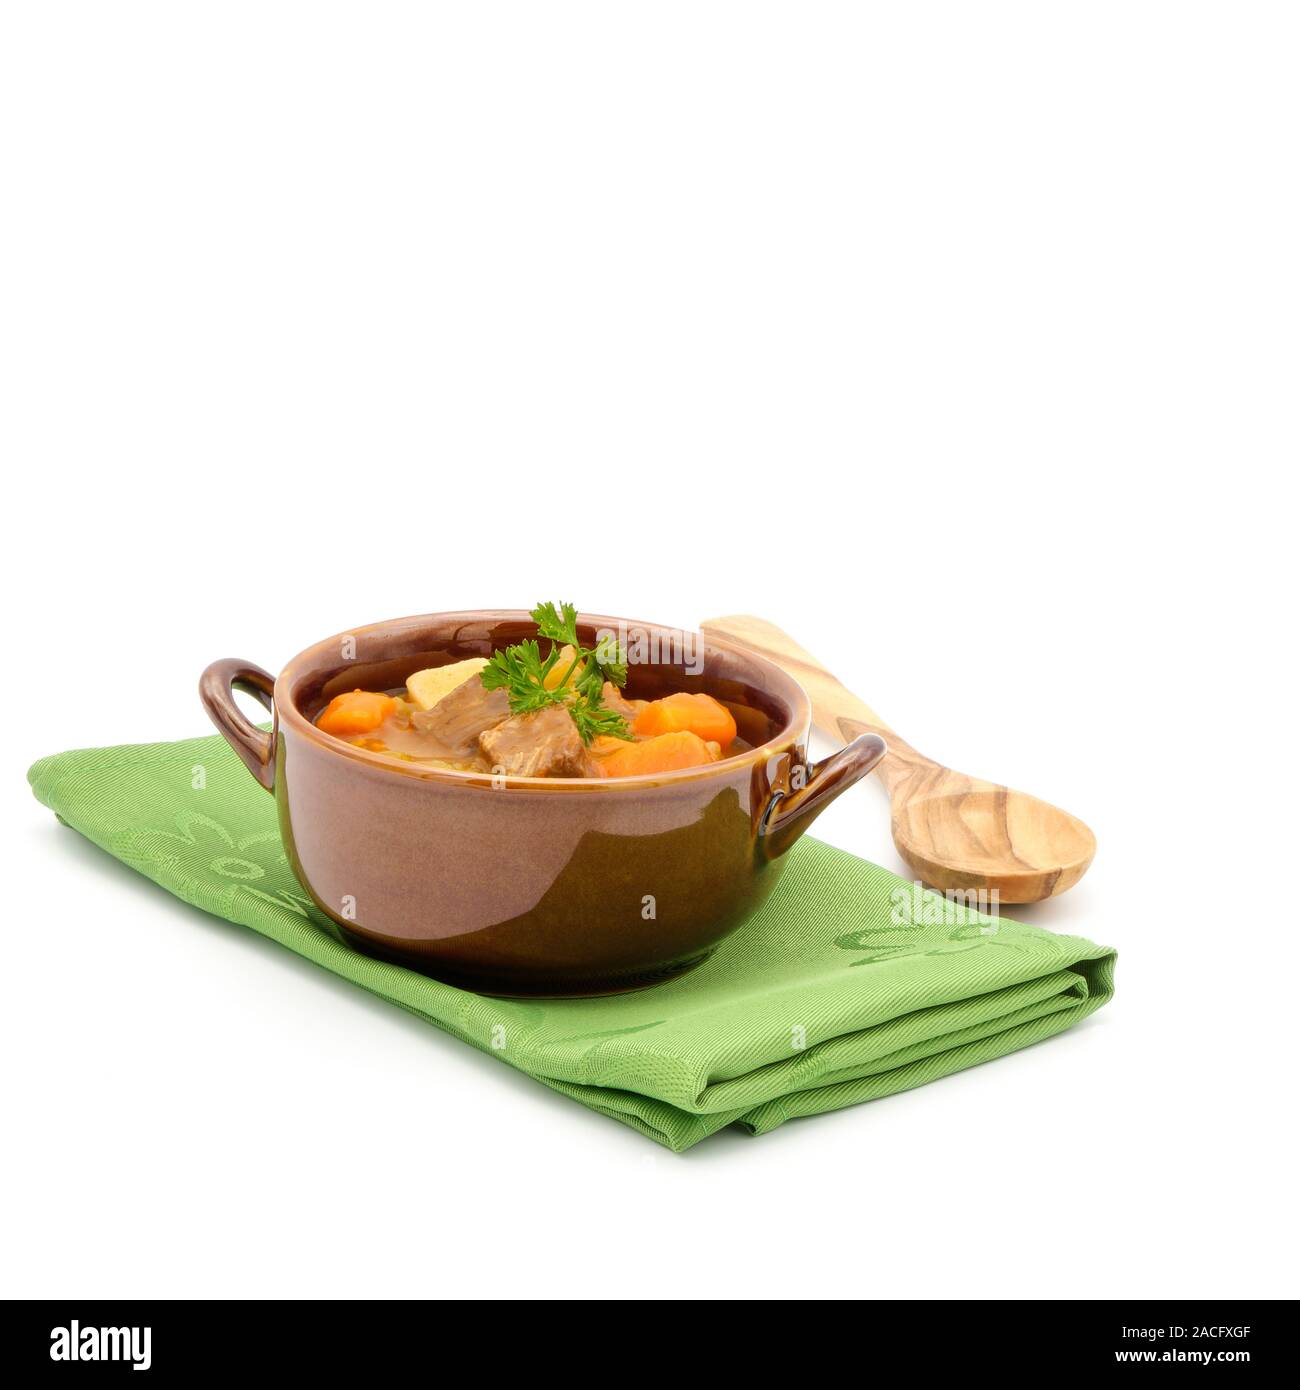 Bowl of hearty beef stew on a green napkin on a white background. Stock Photo